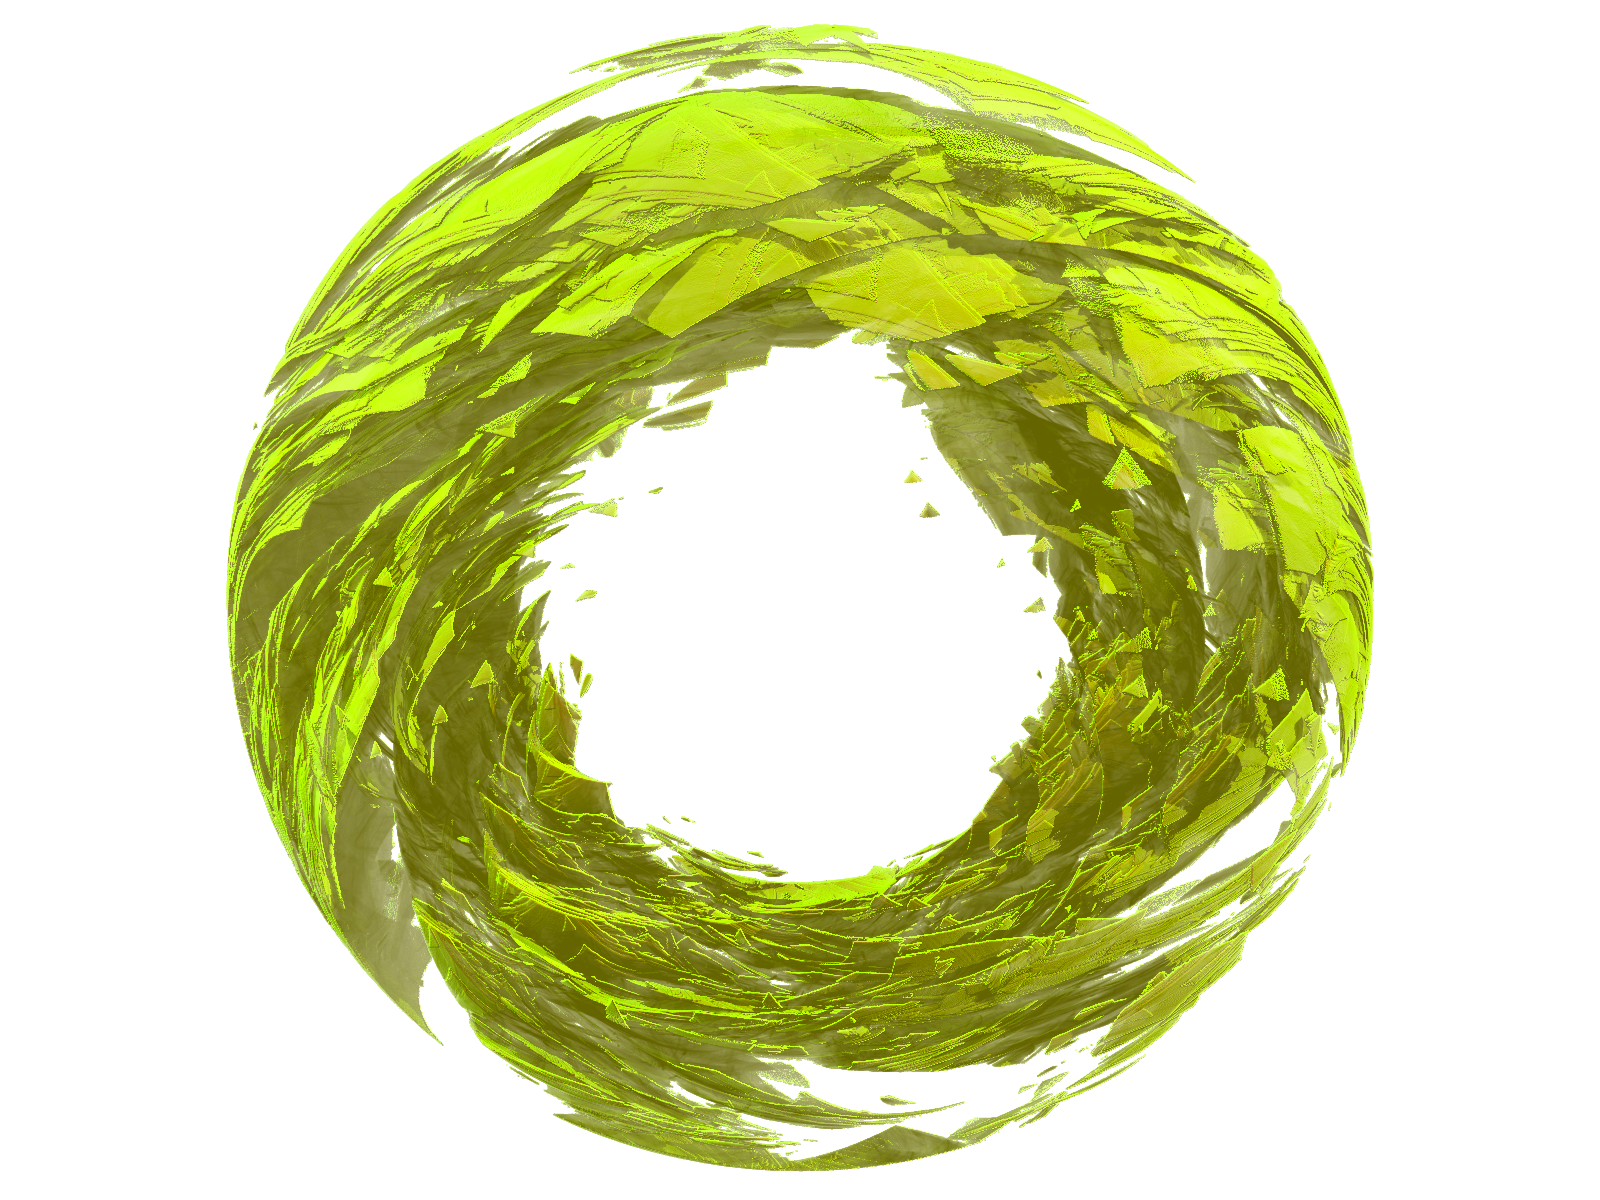 Chaoscope Software Green Shapes Sphere 1600x1200